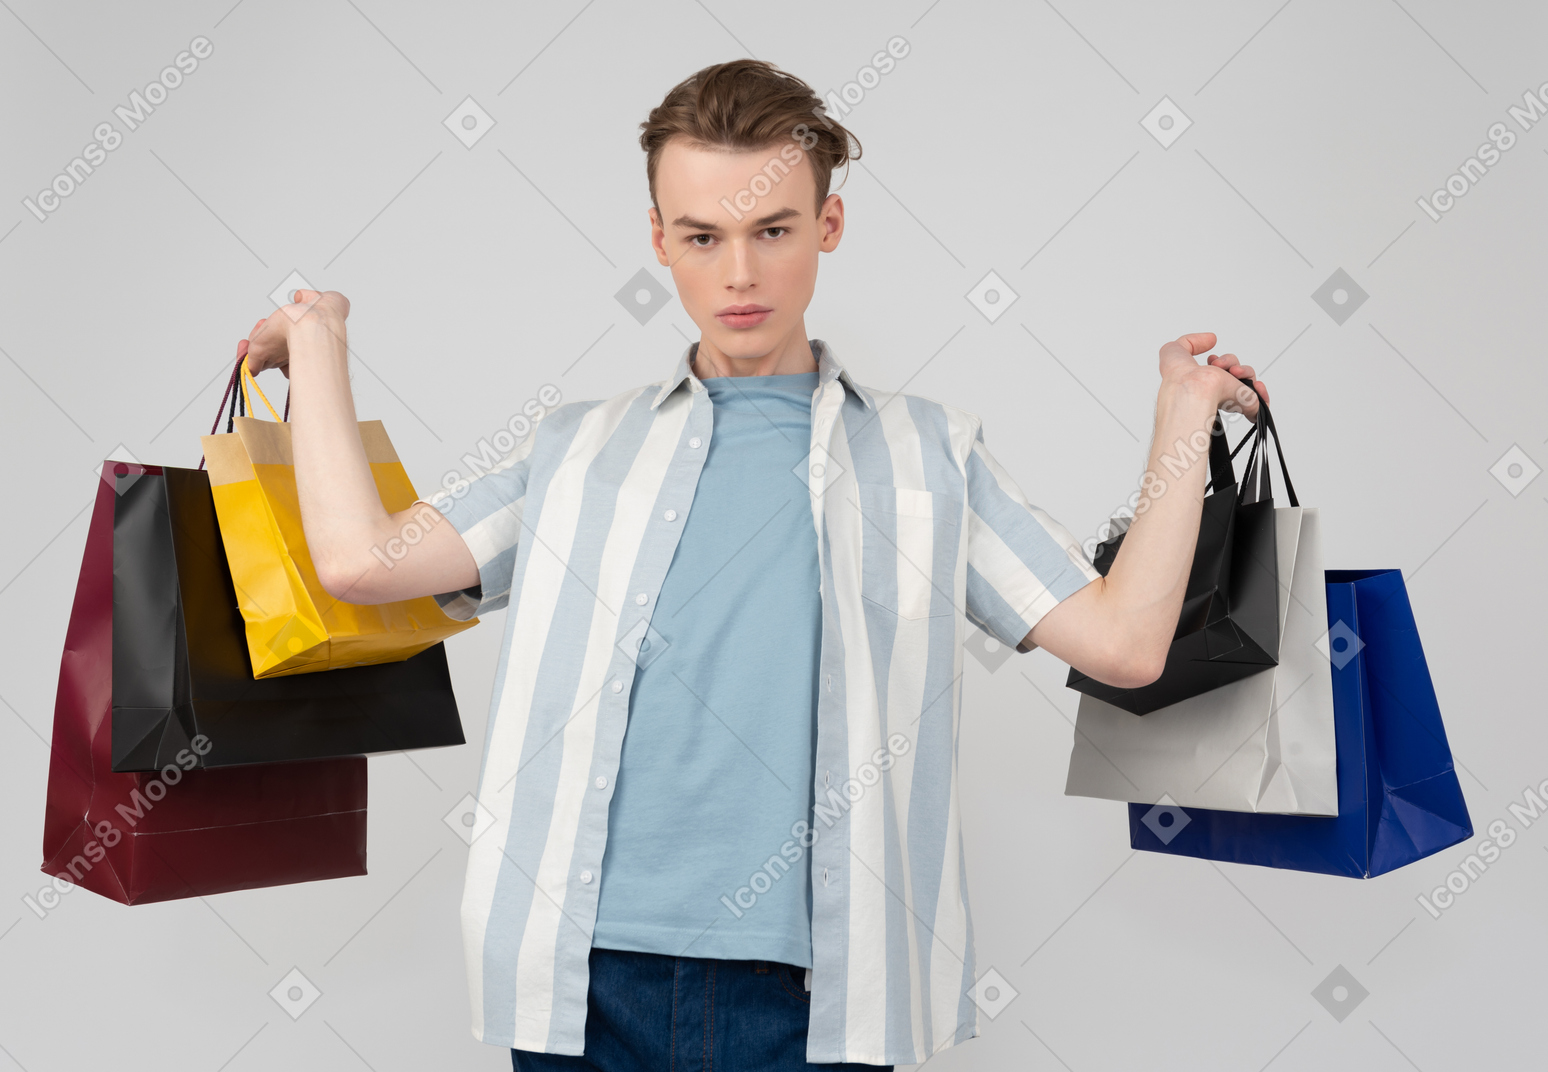 Handsome young man with shopping bags